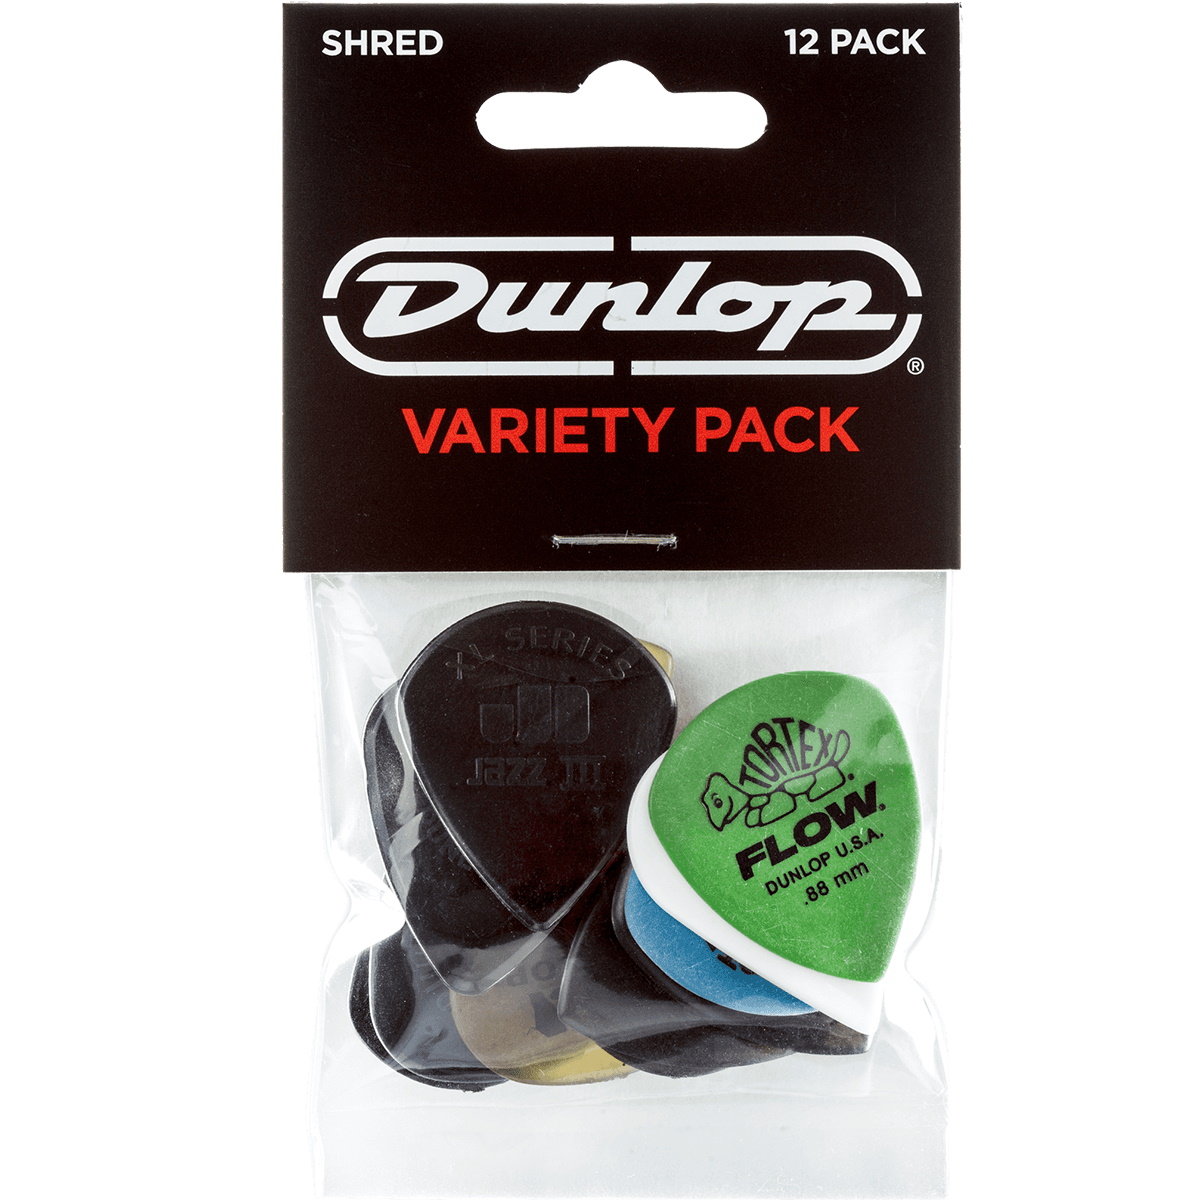 Dunlop Variety Pack PVP118 Shred